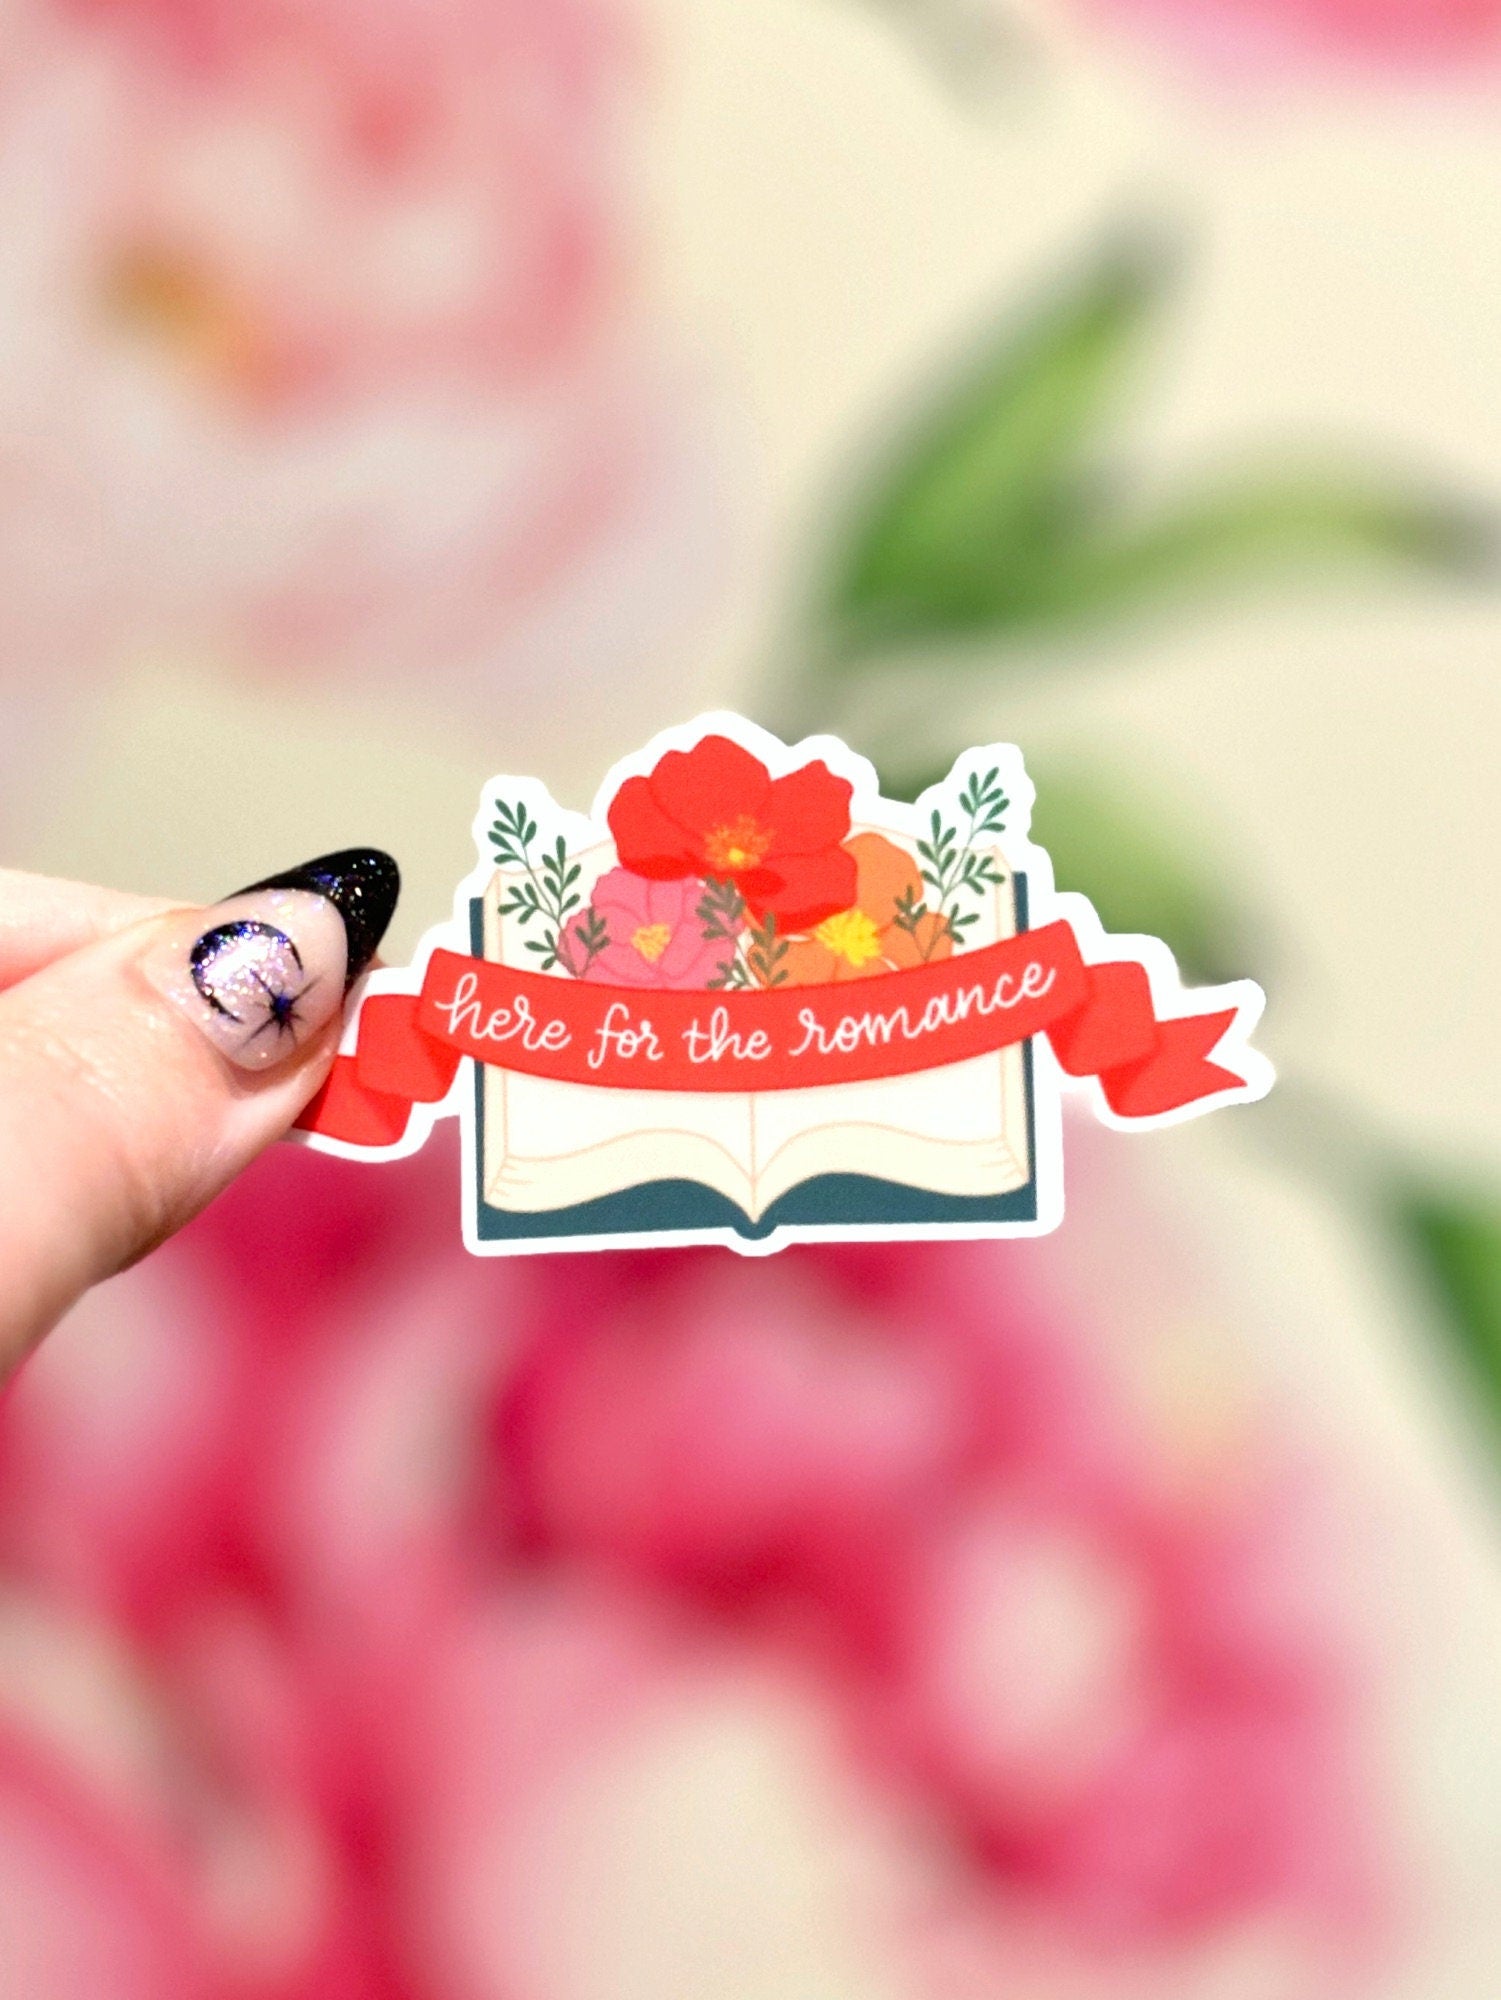 Here for the Romance Book matte water resistant vinyl sticker for book lover